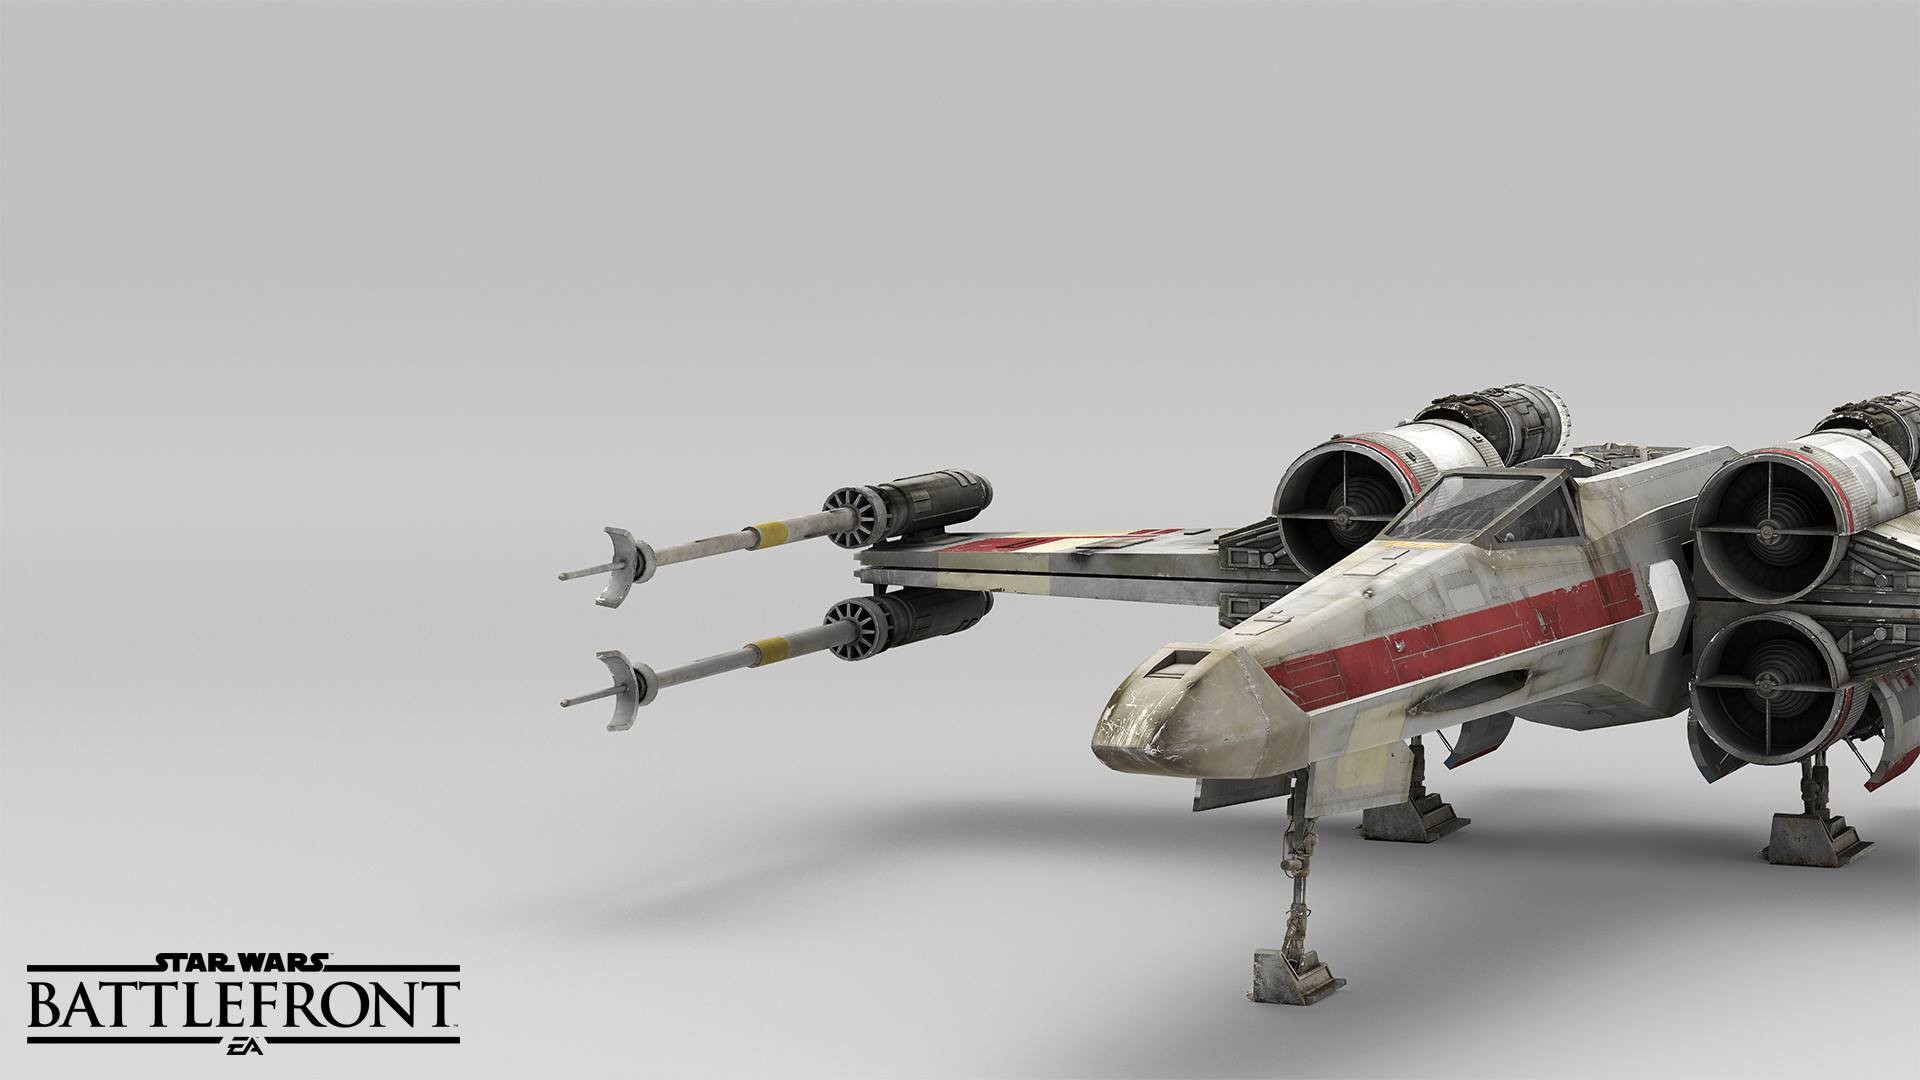 General 1920x1080 Star Wars Star Wars: Battlefront X-wing Rebel Alliance PC gaming video games Star Wars Ships science fiction simple background vehicle spaceship Electronic Arts EA DICE